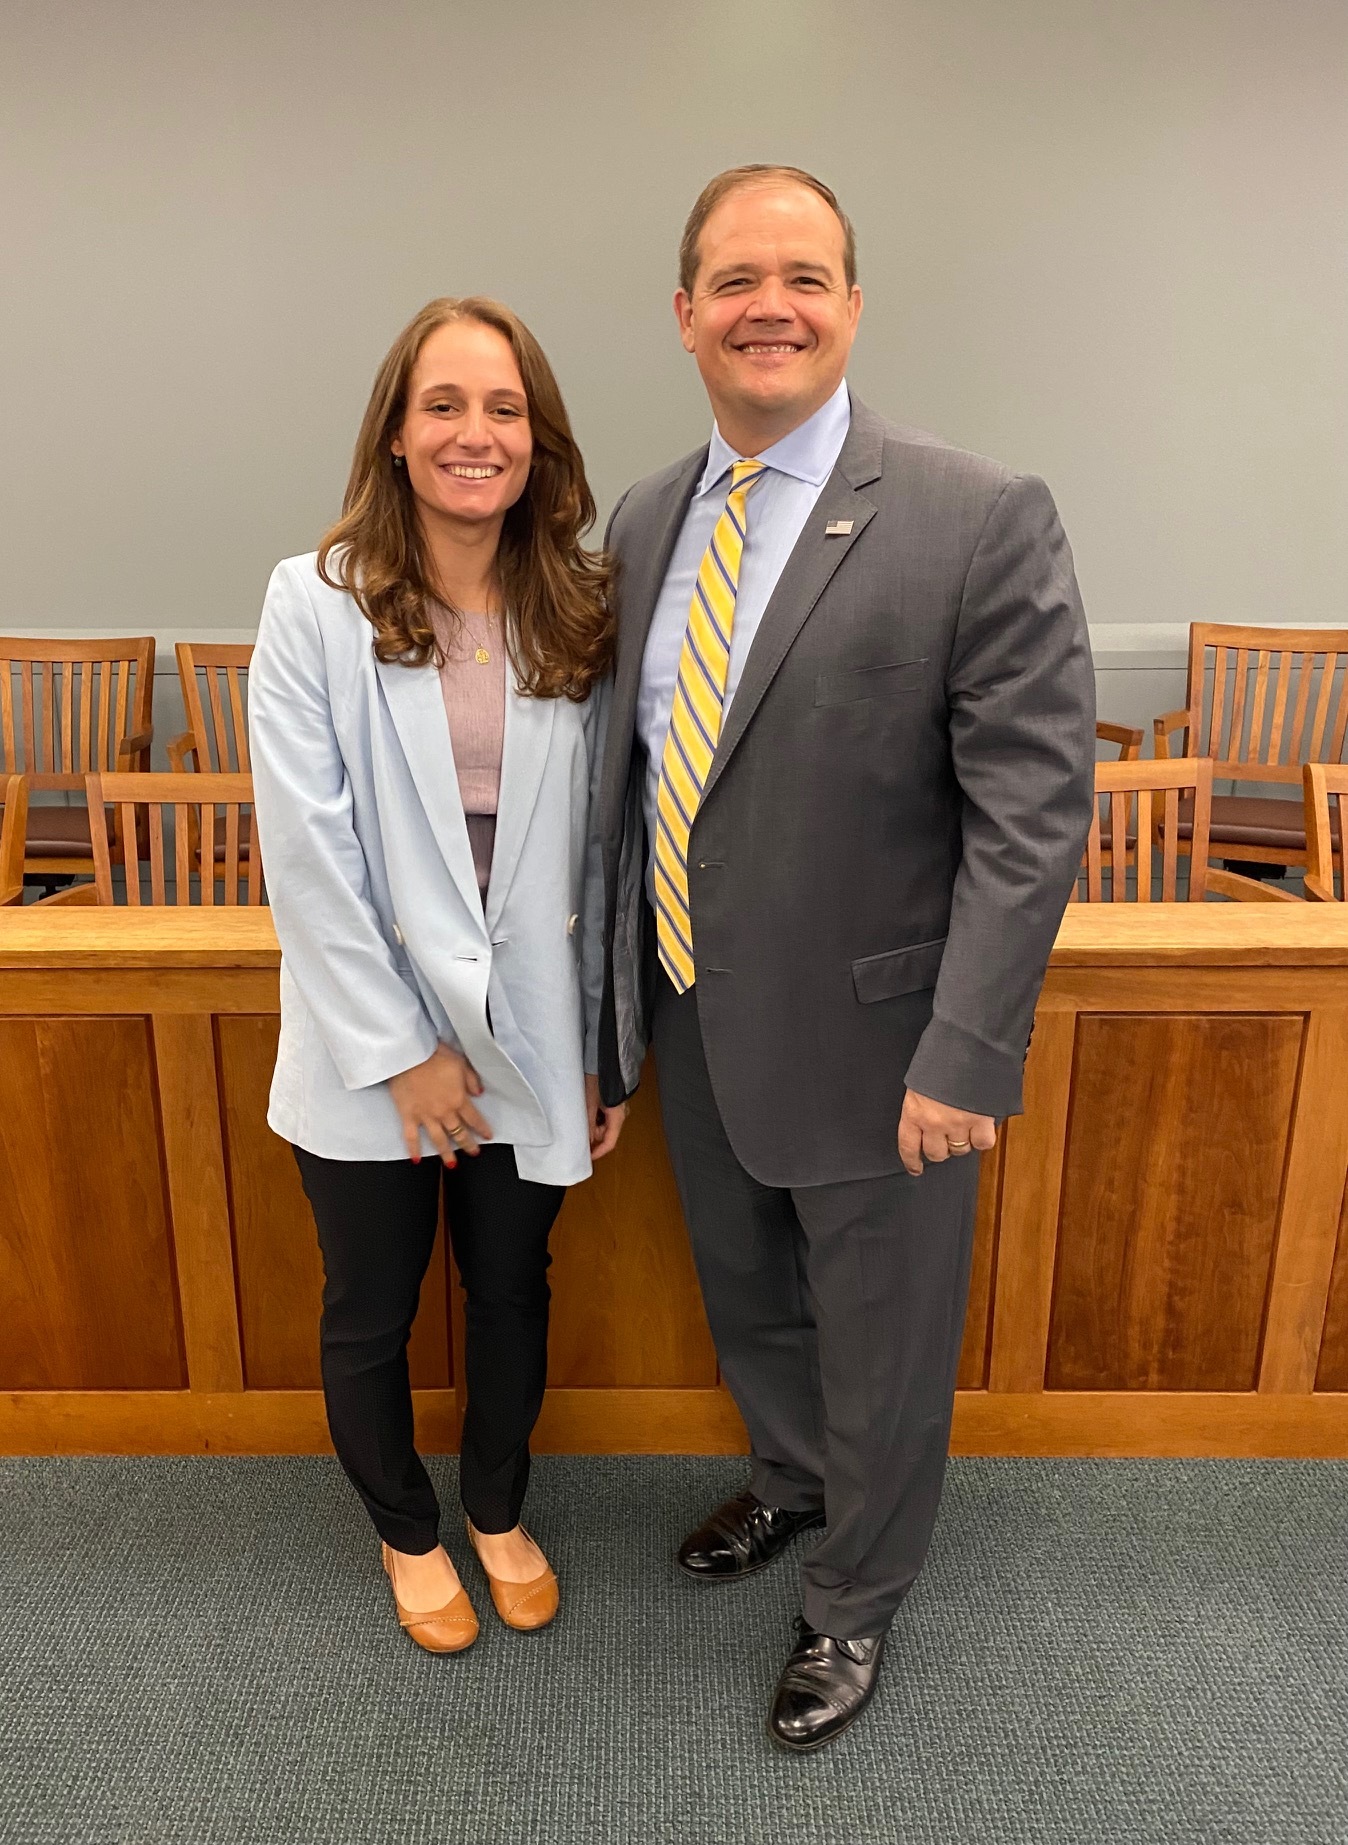 Juliet Tomaro of Westhampton Beach is among the students who were selected to intern at the Suffolk County District Attorneys Office. Tomaro, shown with District Attorney Raymond Tierney, is an undergraduate at SUNY Binghampton and is assigned to the Major Crimes Bureau. COURTESTY SUFFOLK COUNTY DISTRICT ATTORNEYS OFFICE